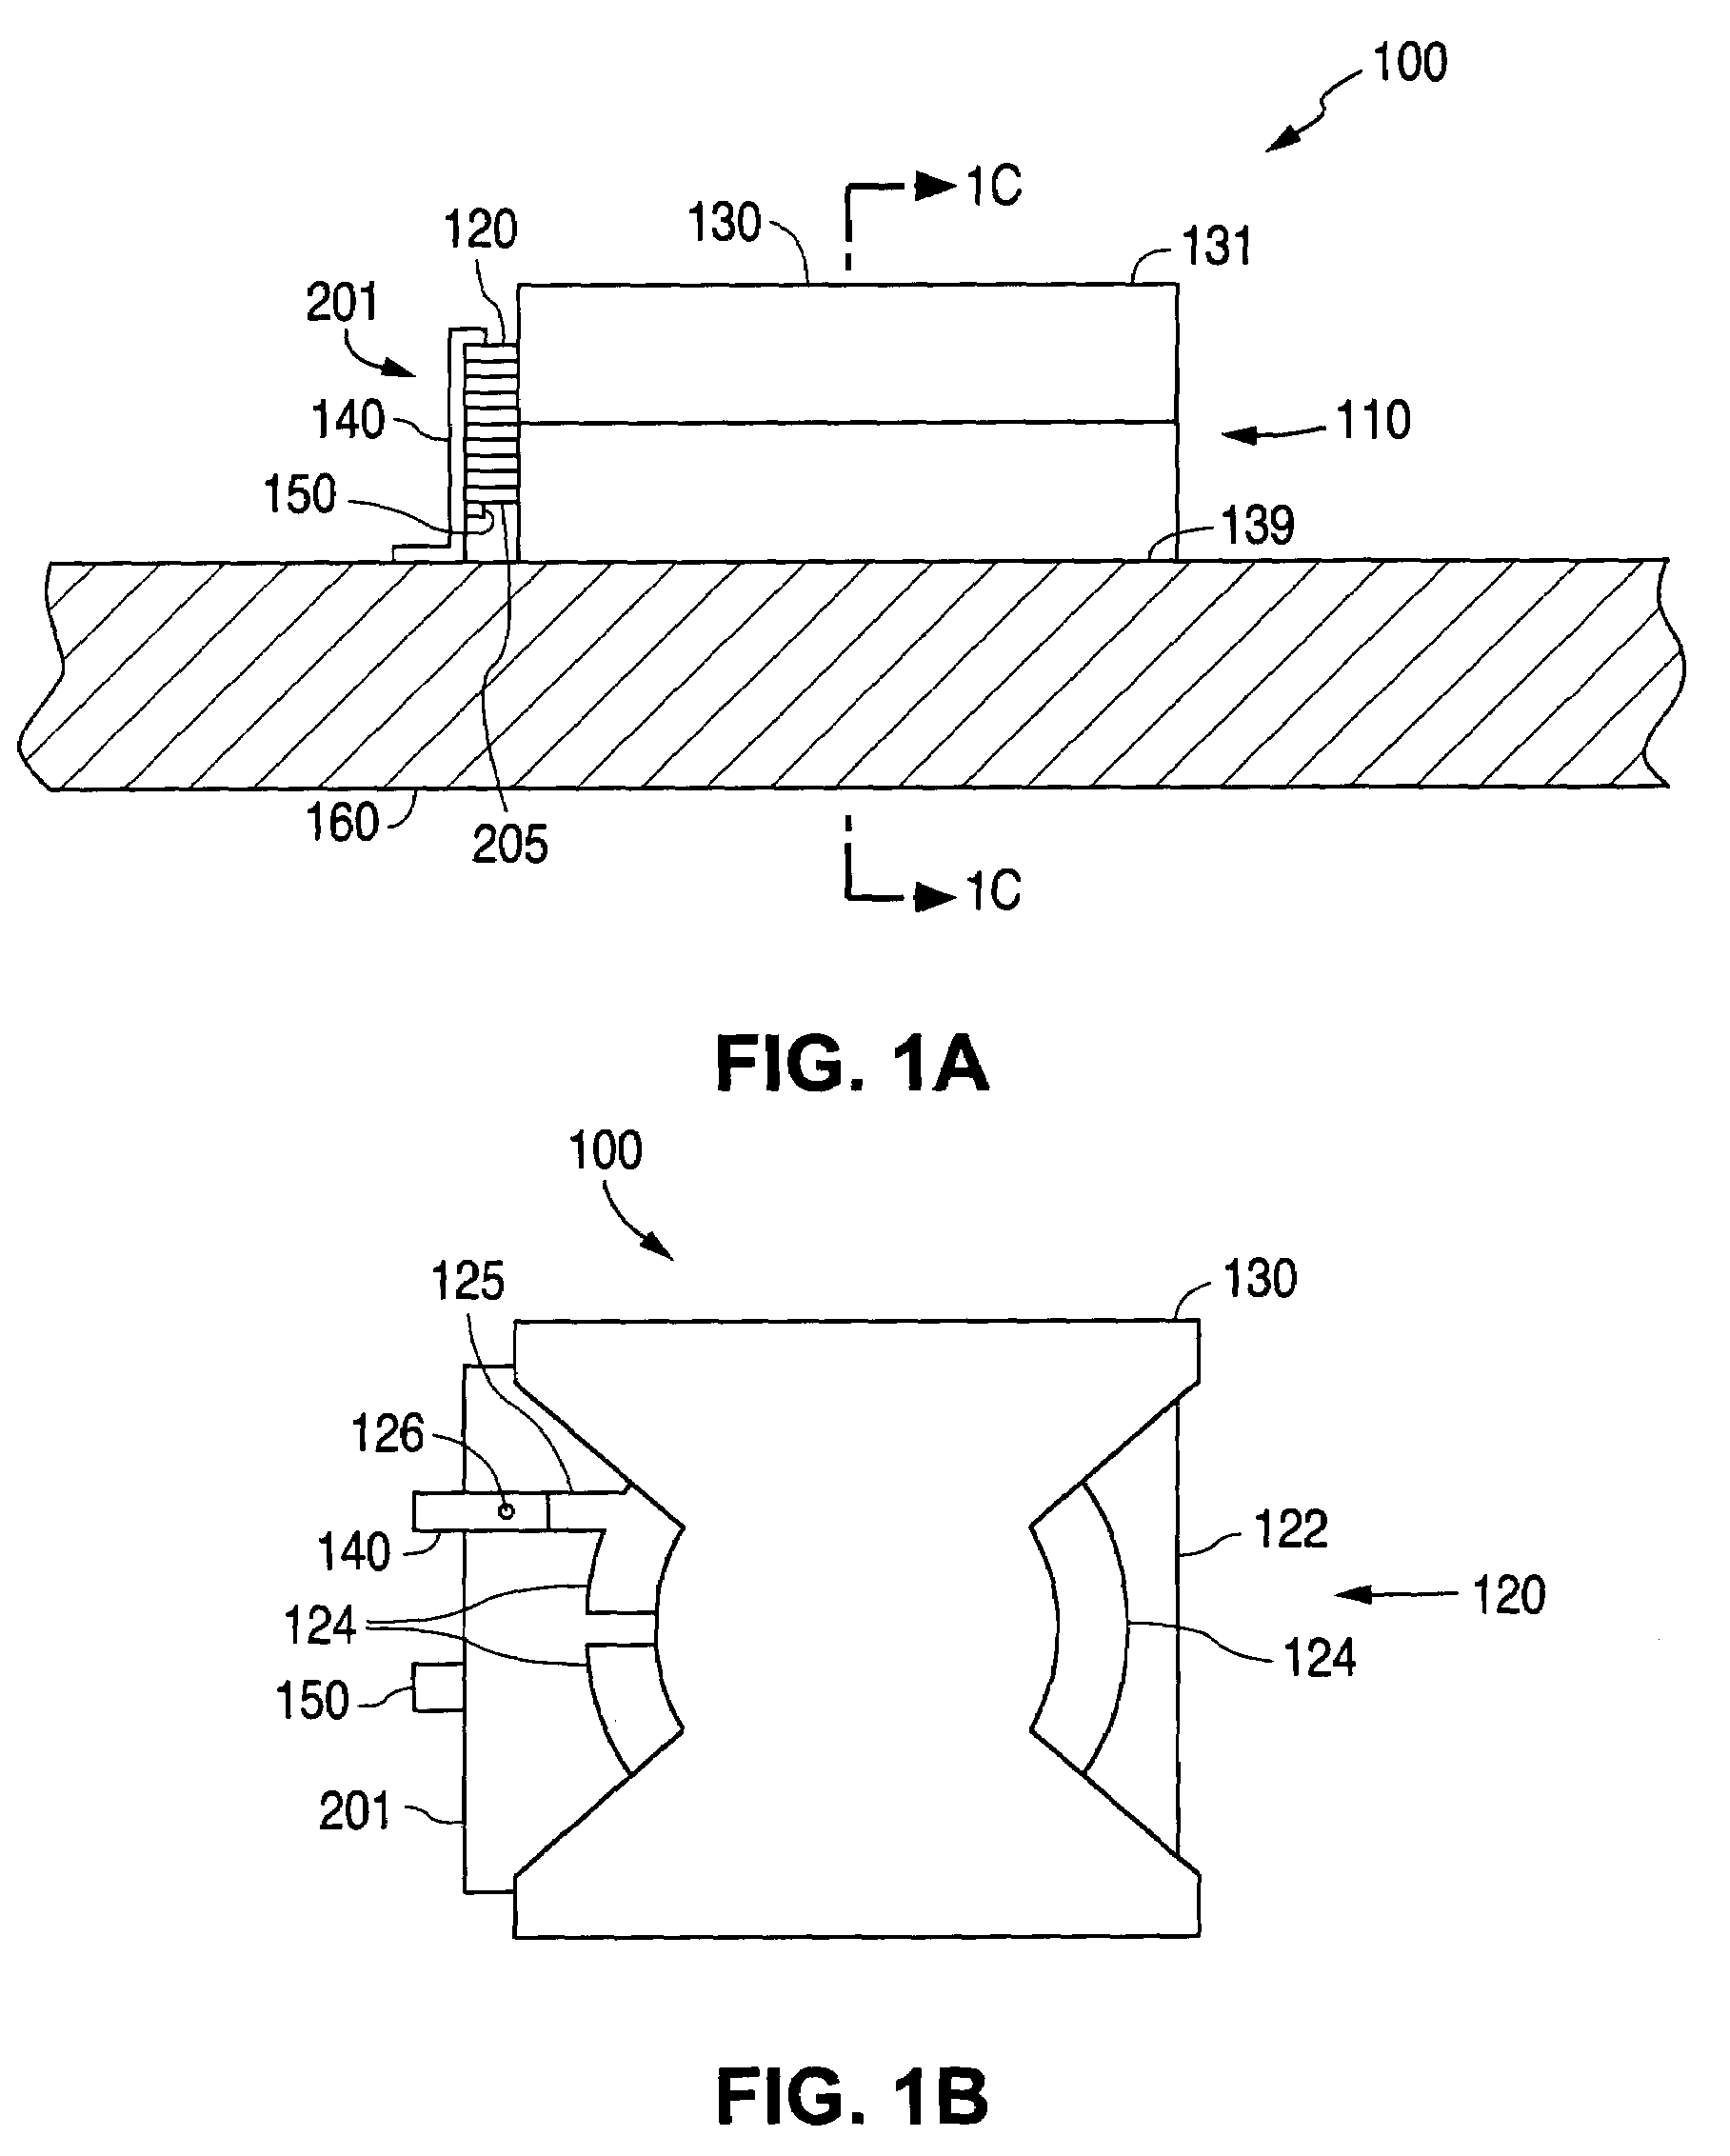 Multi-layer printed circuit board inductor winding with added metal foil layers